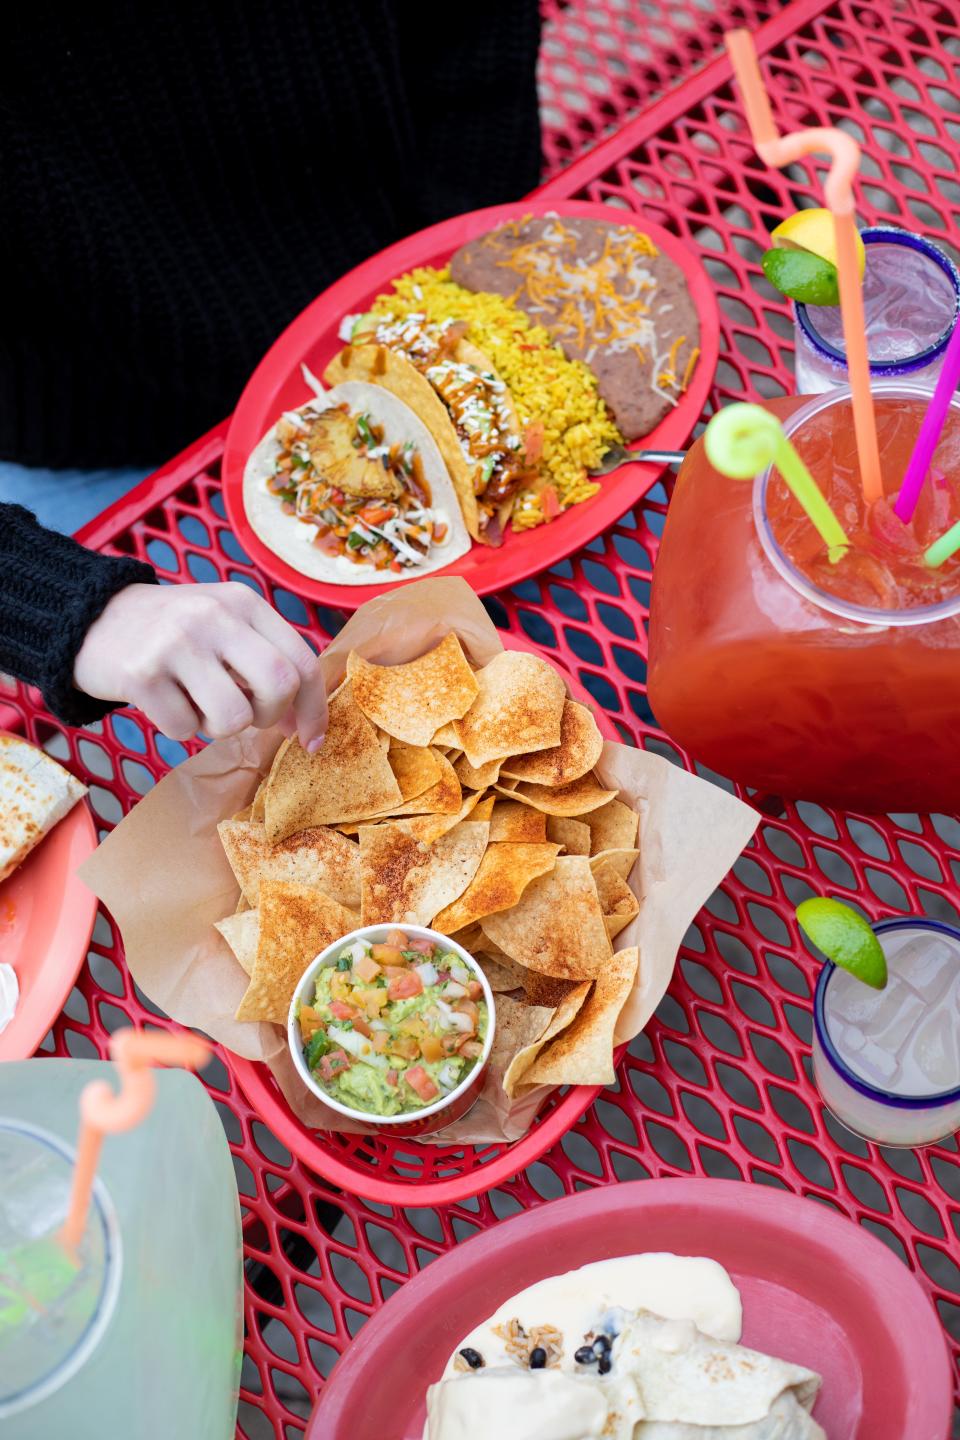 The ninth Fuzzy's Taco location operated by The Social Order recently opened on North May.